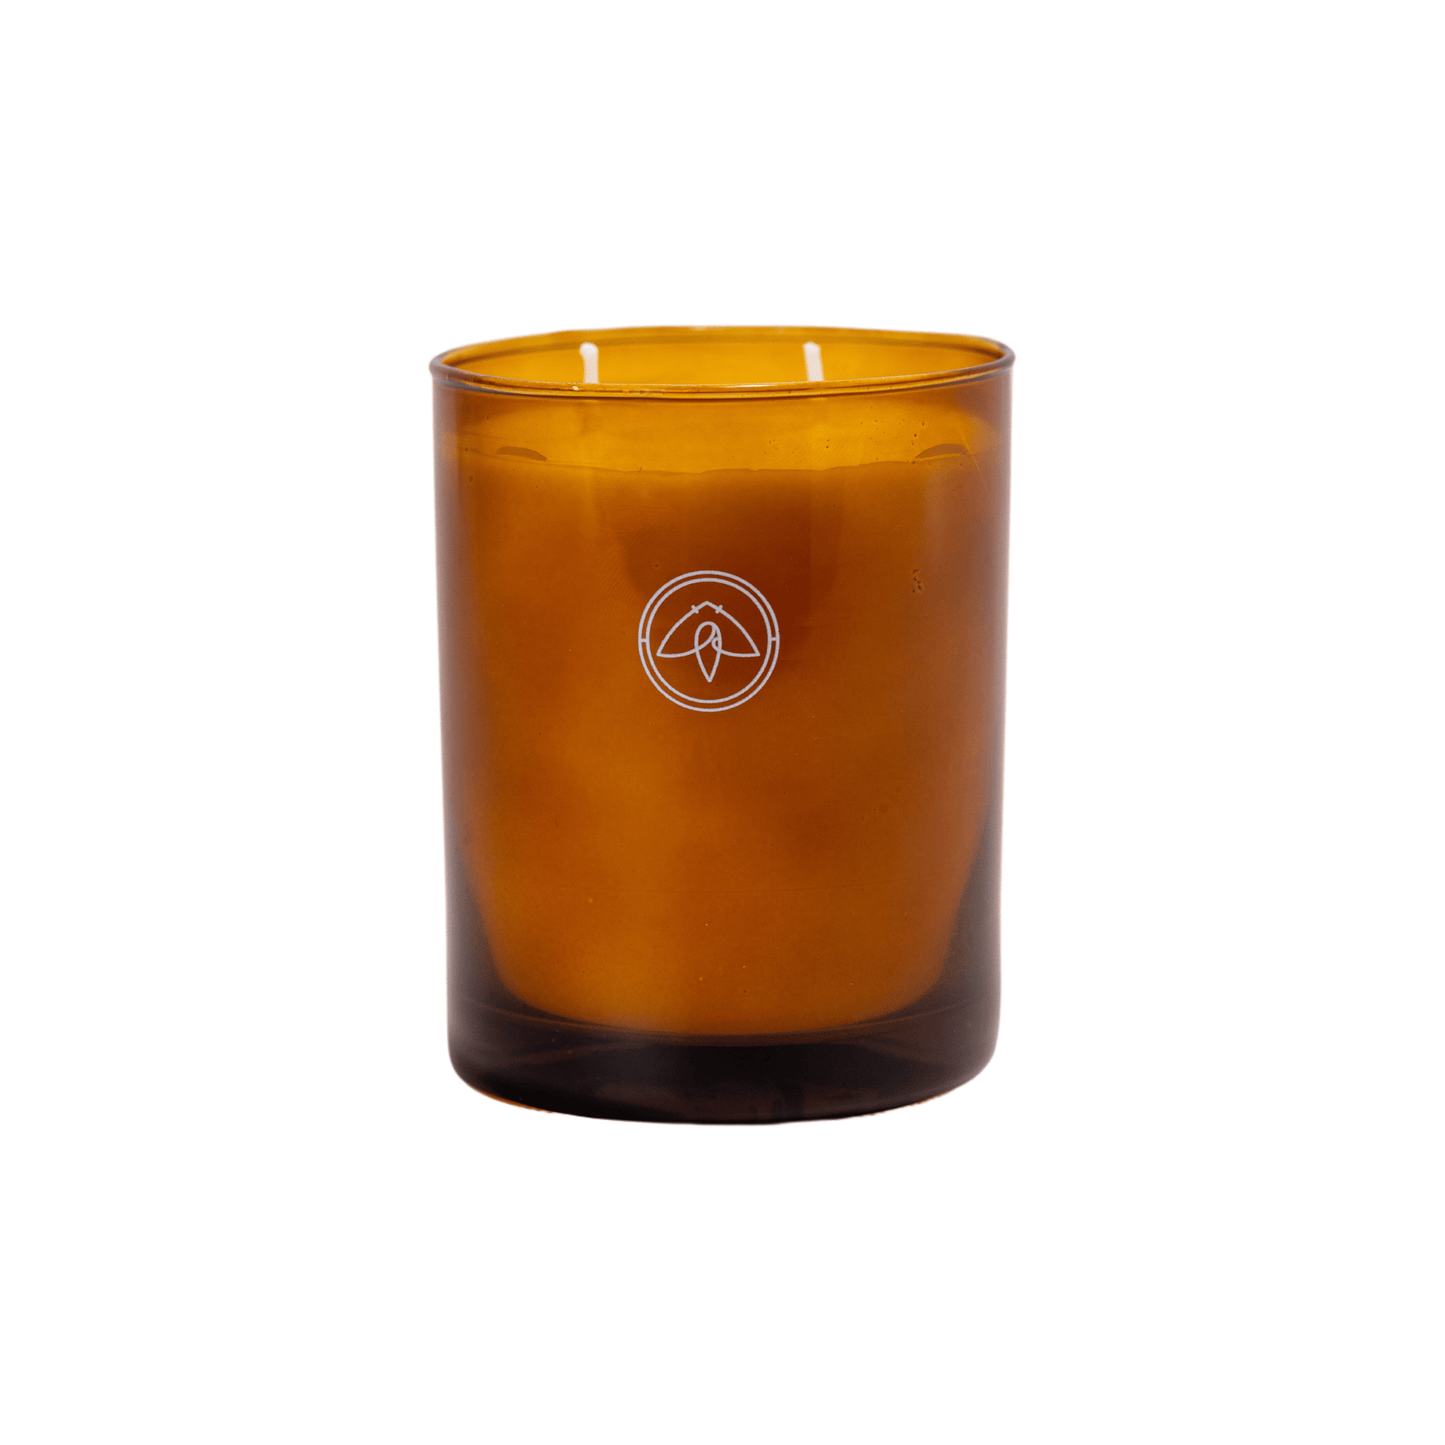 Glow 10oz. Candle - Summer Nights two wick unlit candle on white background